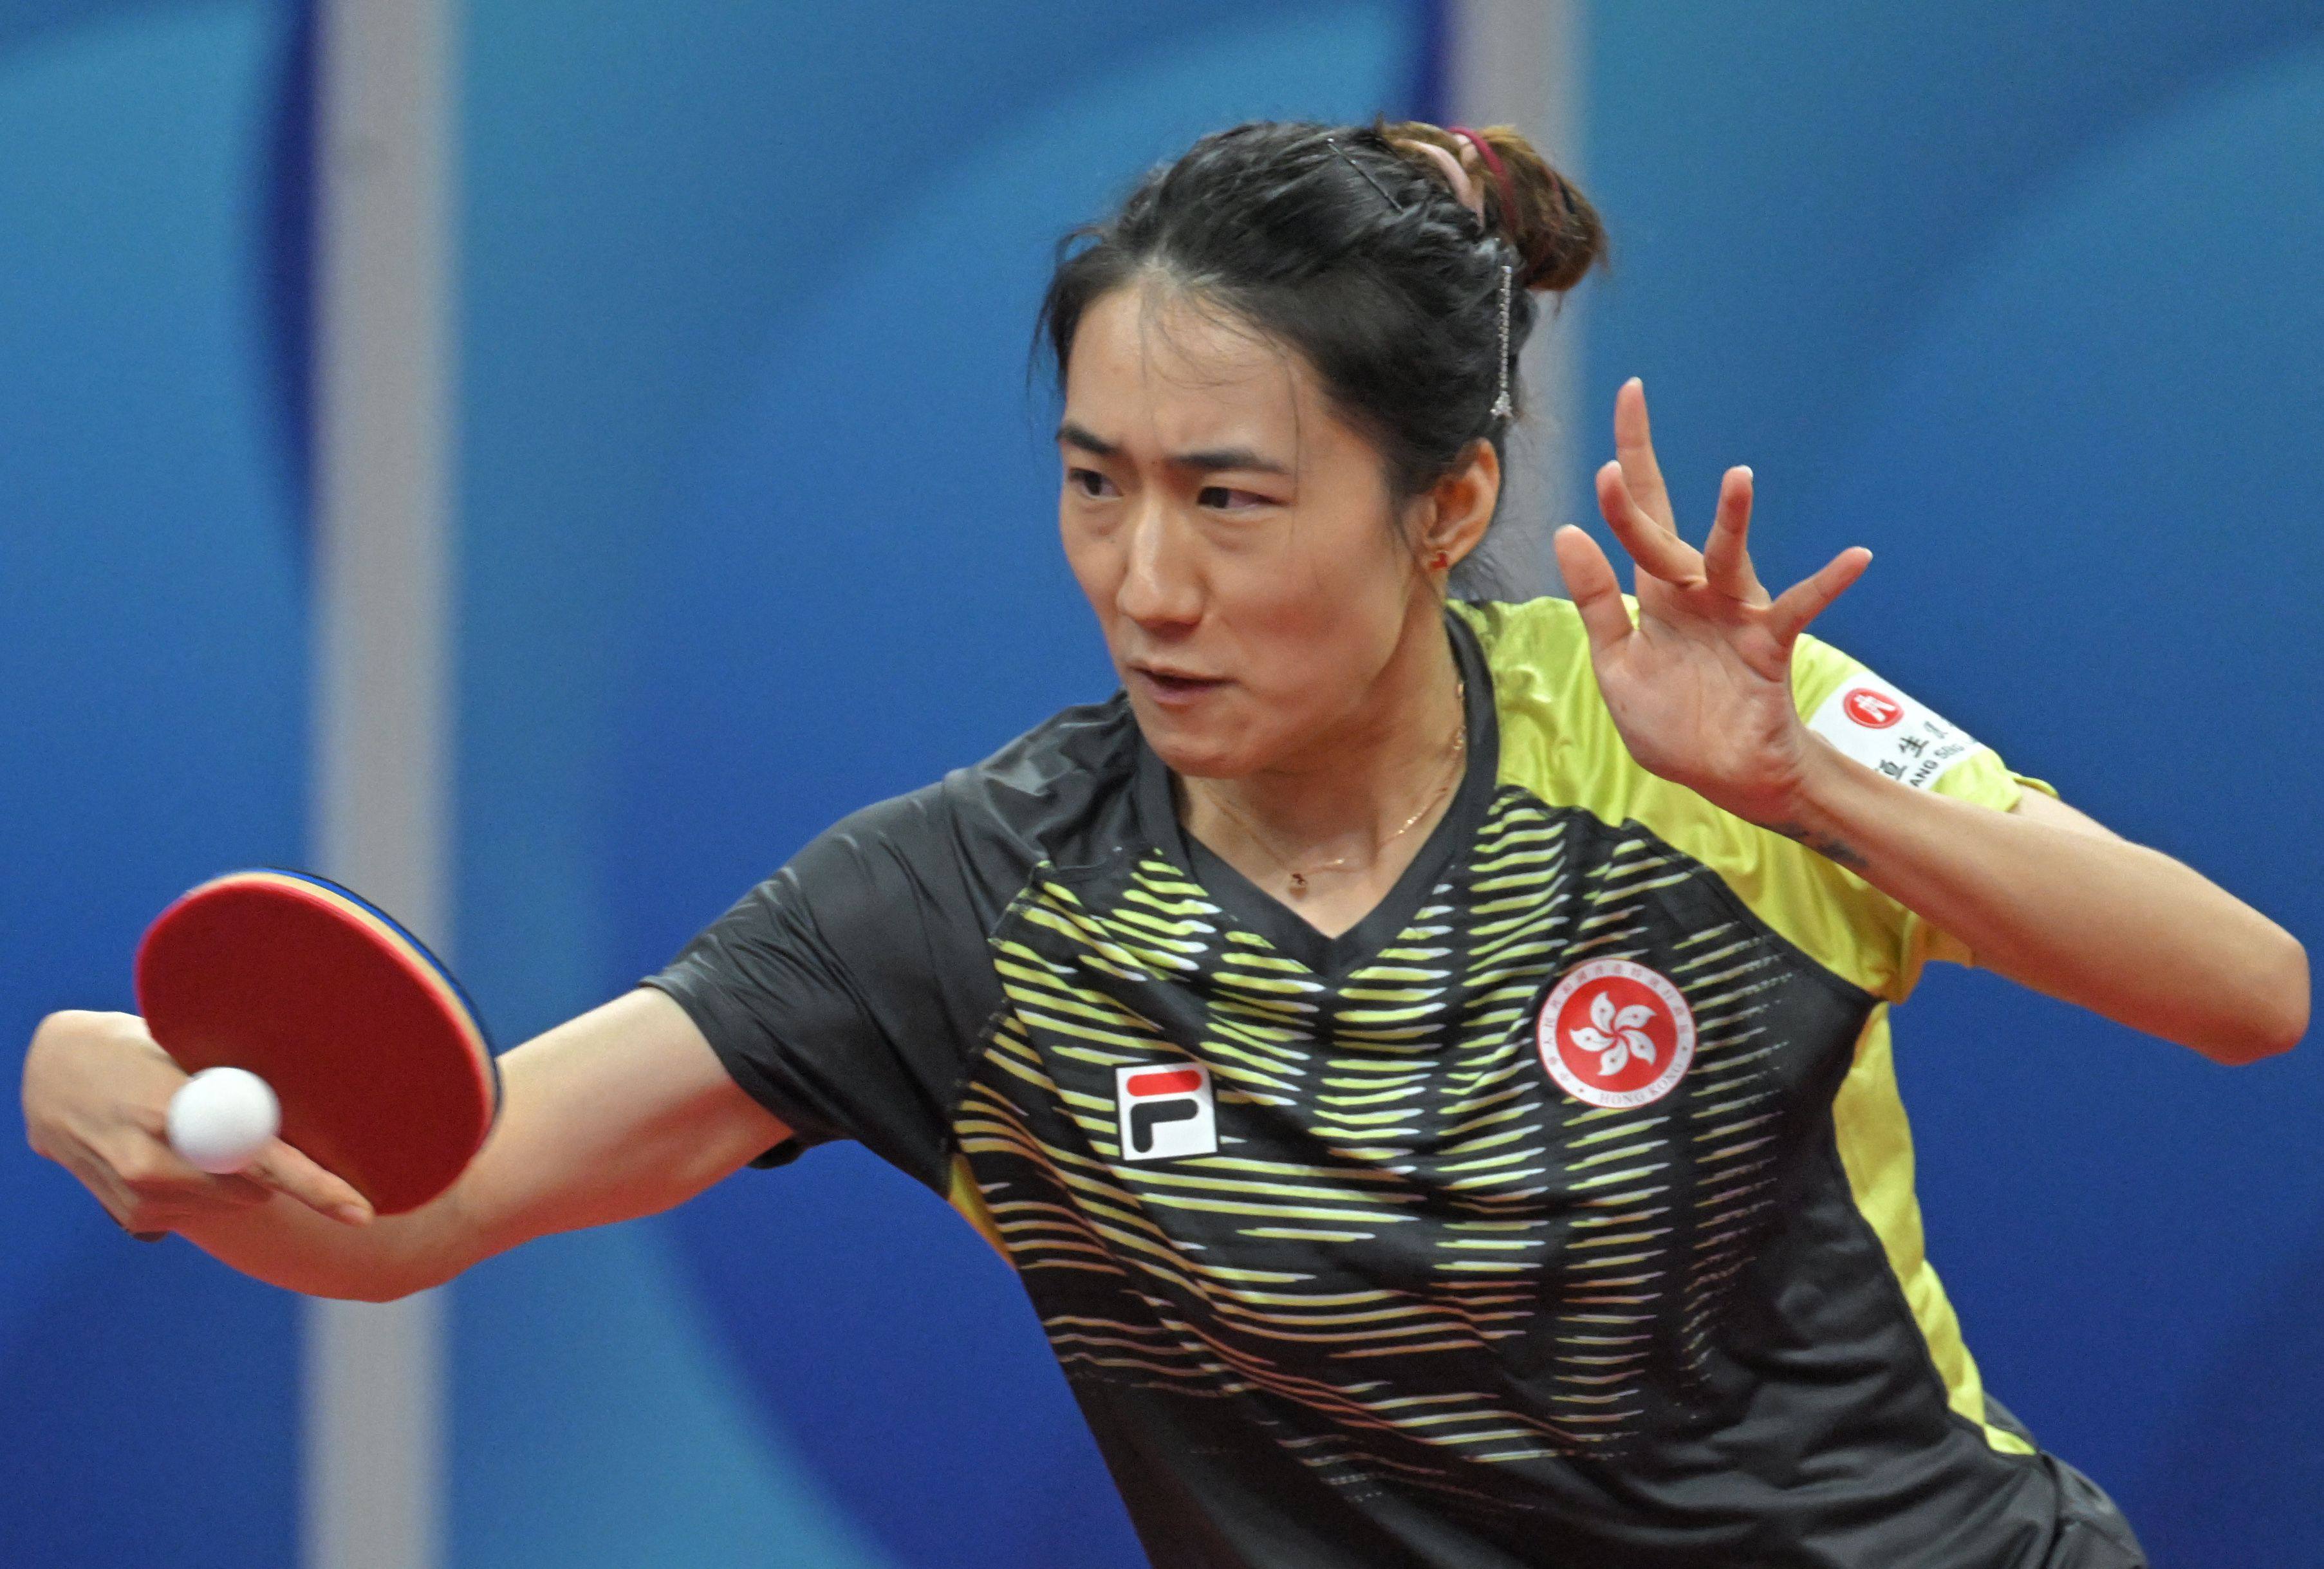 Hong Kong’s Zhu Chengzhu in action at the World Team Table Tennis Championships in Chengdu. Photo: AFP